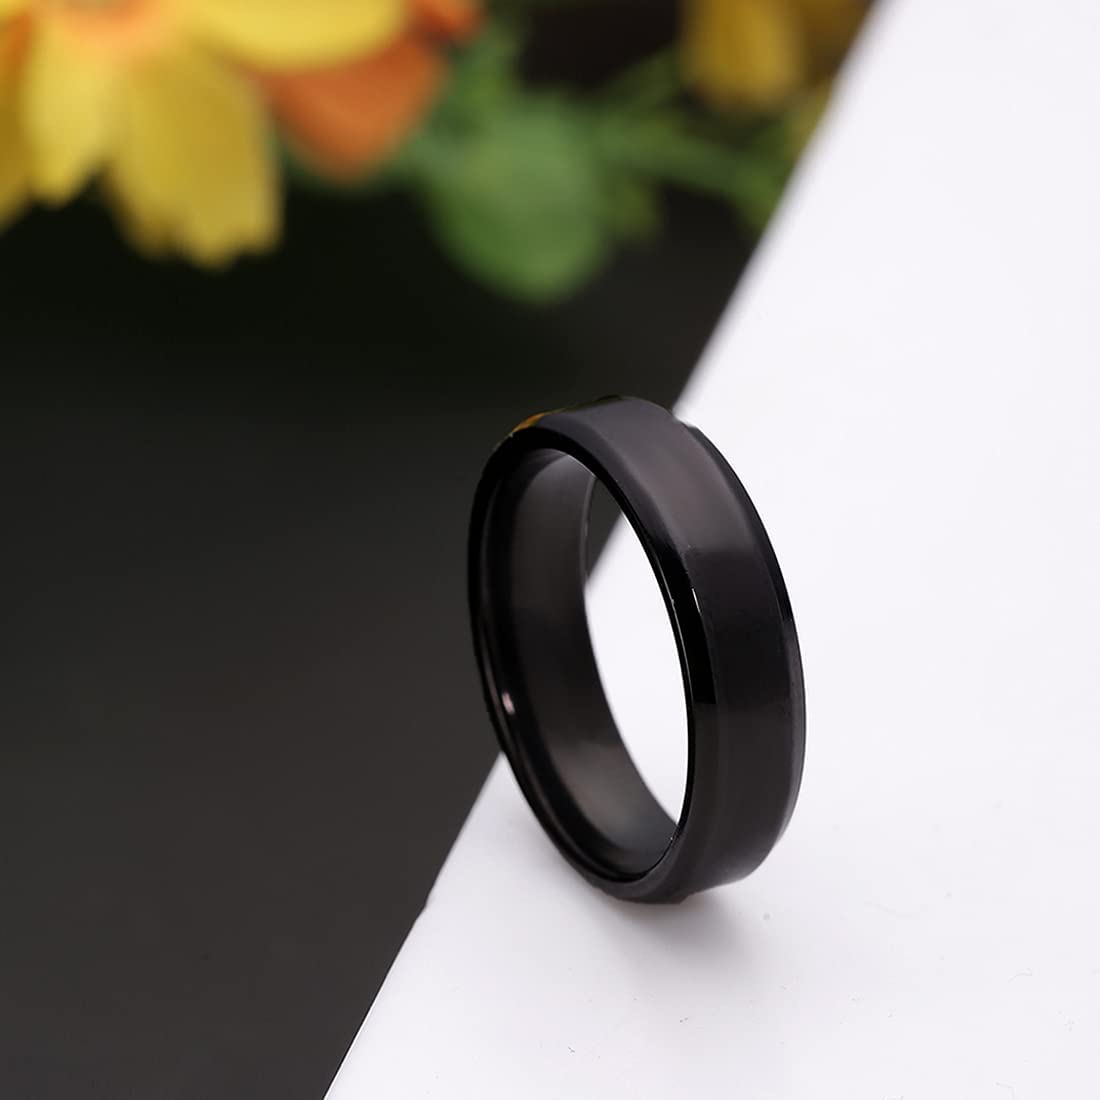 Yellow Chimes Rings for Men Stainless Steel Black Gold Silver 3PCs Combo Band Rings for Men and Boys.